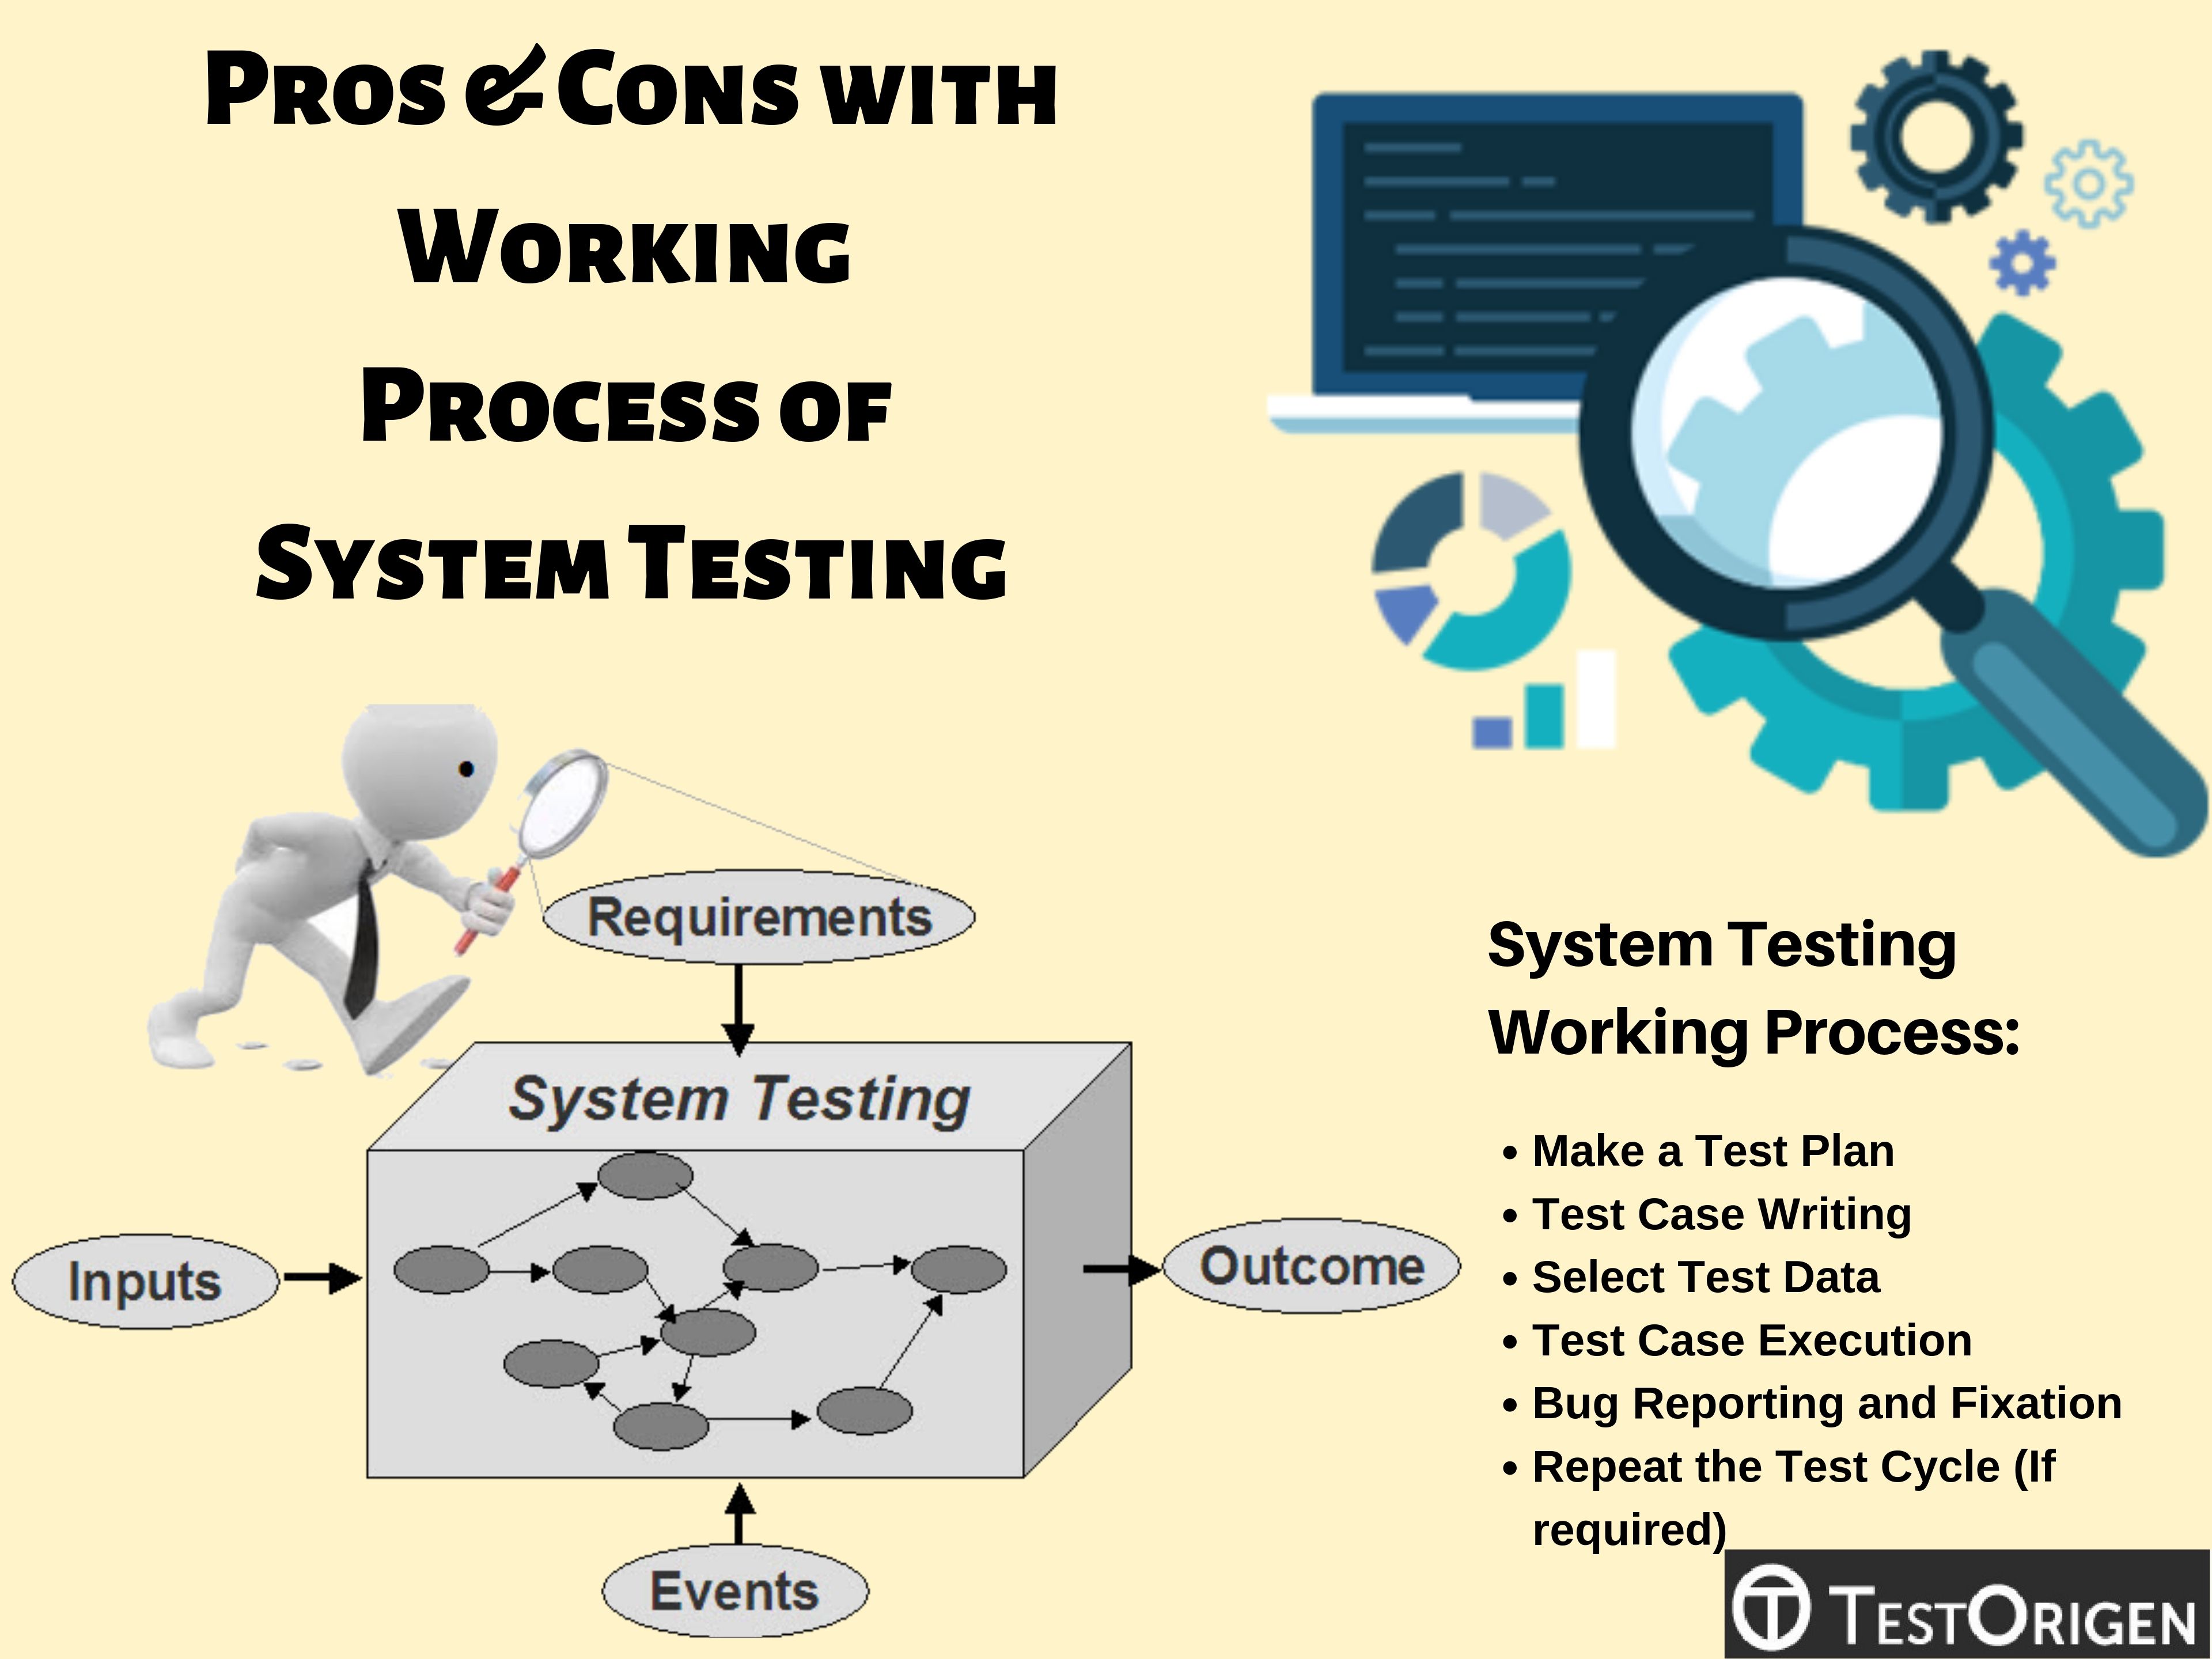 Pros and Cons with Working Process of System Testing. System testing method